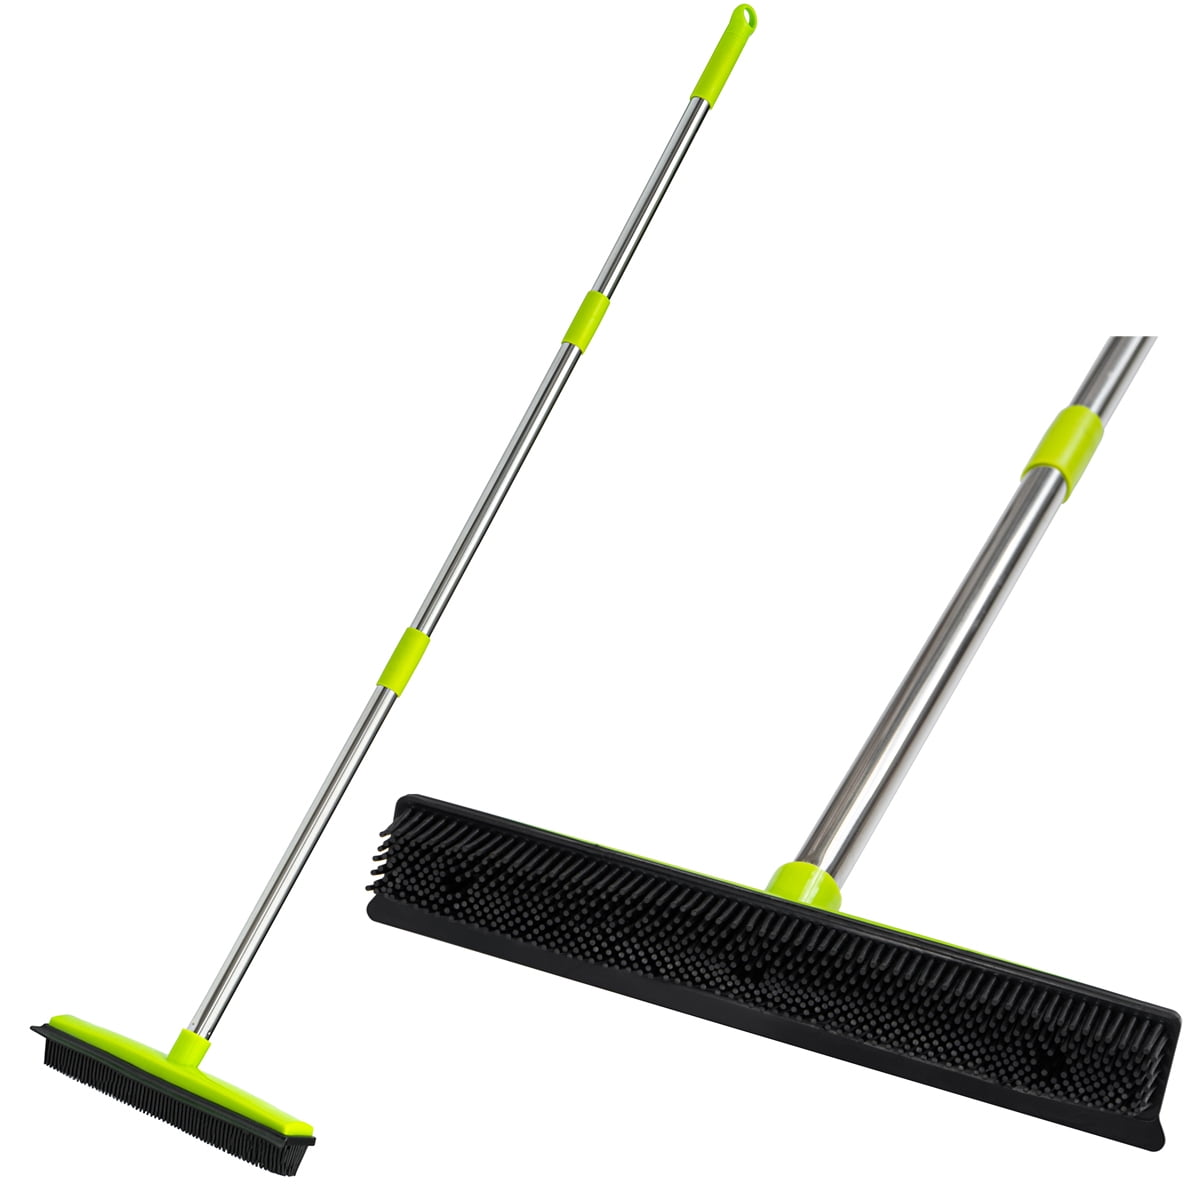 The Miracle Rubber Broom 